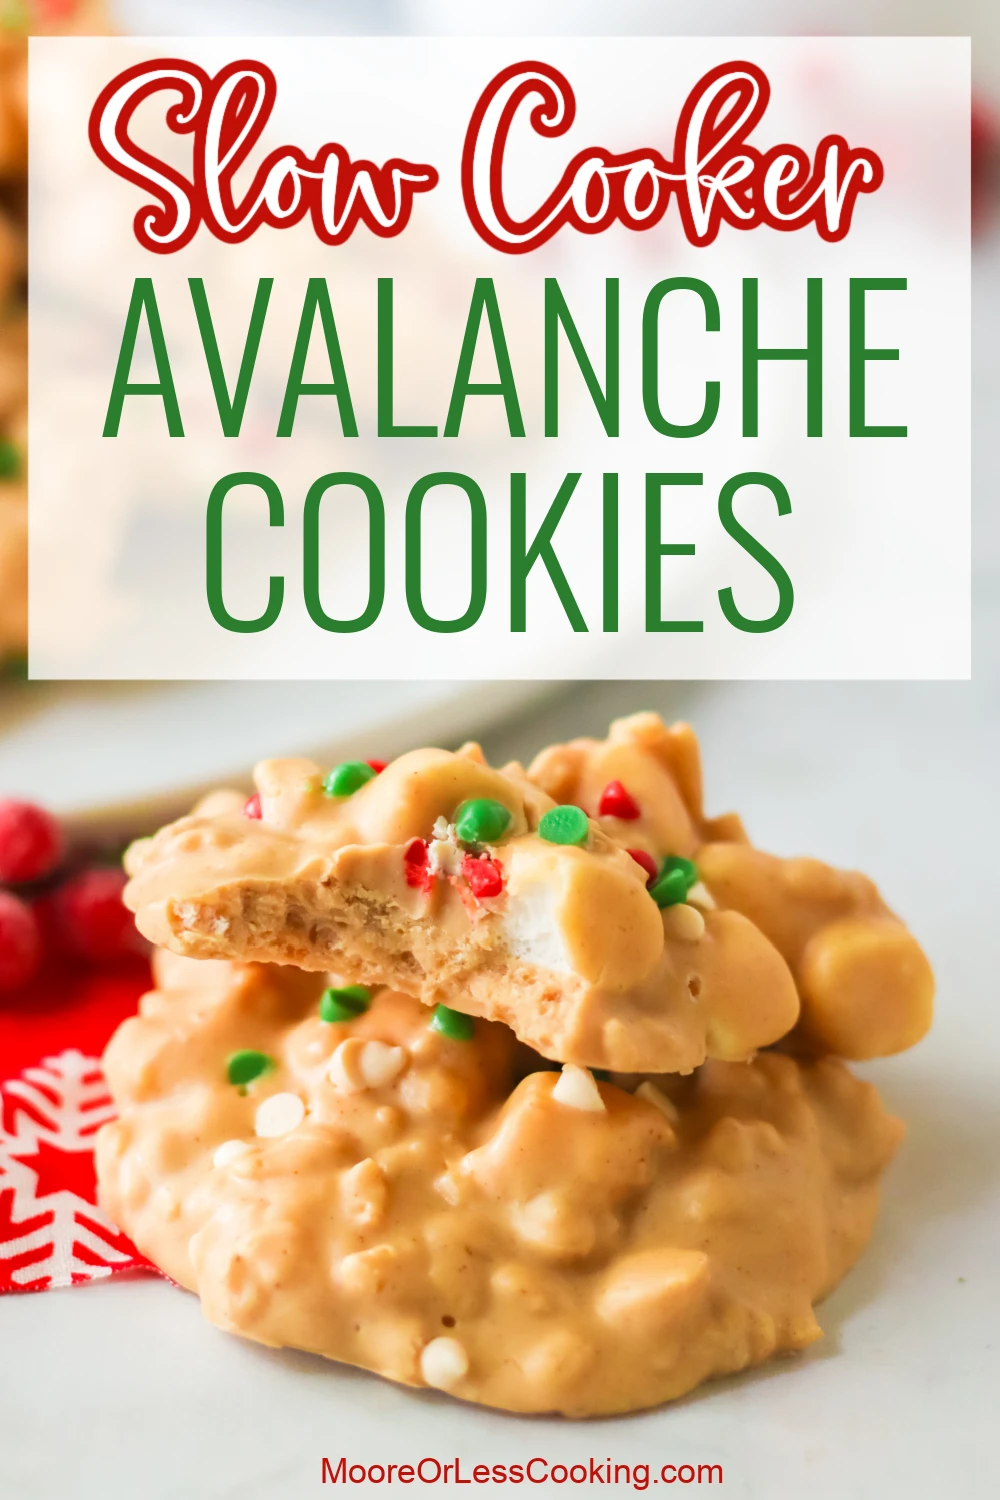 Peanut butter, chocolate, marshmallows, puffed rice, and white almond bark combine to make an irresistible no-bake sweet treat with this Slow Cooker Avalanche Cookies recipe, Crunchy, chewy, and packed with deliciousness, these cookies are perfect for the holidays and beyond. via @Mooreorlesscook